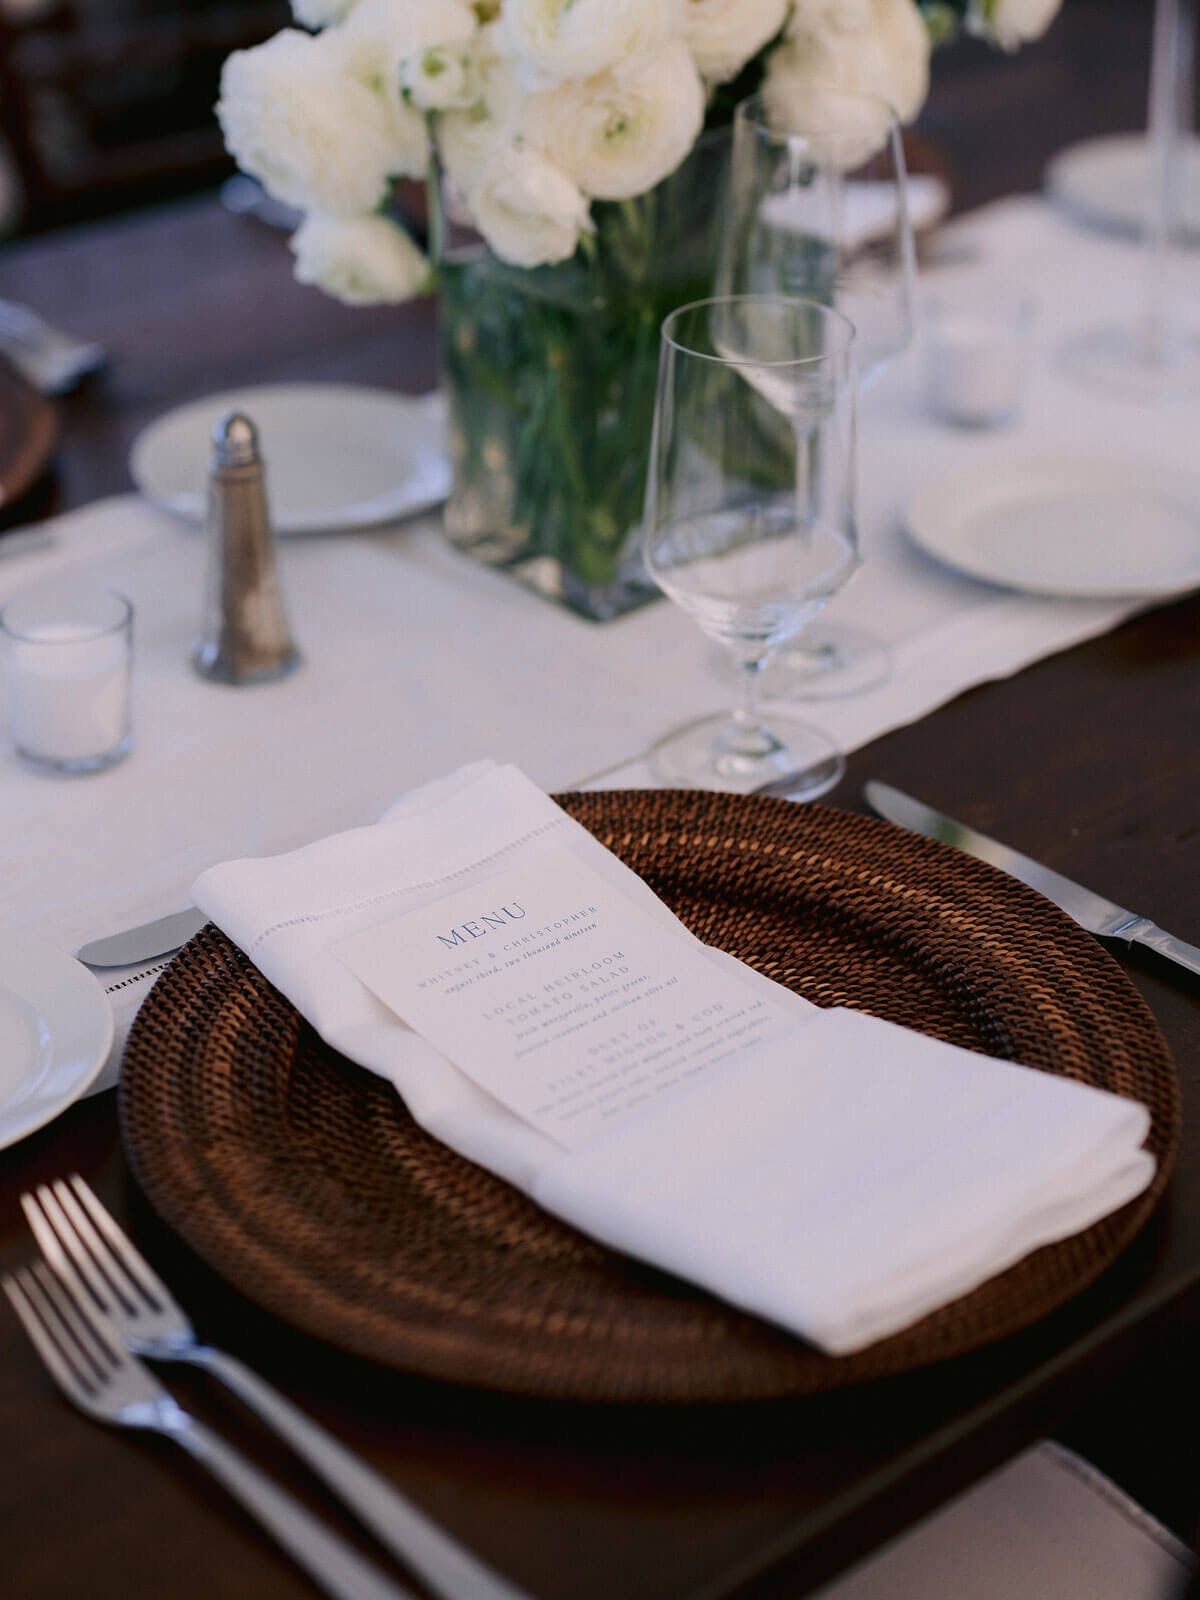 A wicker plate holder, table napkin and Menu, cutleries, glasses, and flowers on a dining table at Cape Cod Summer Tent, MA.